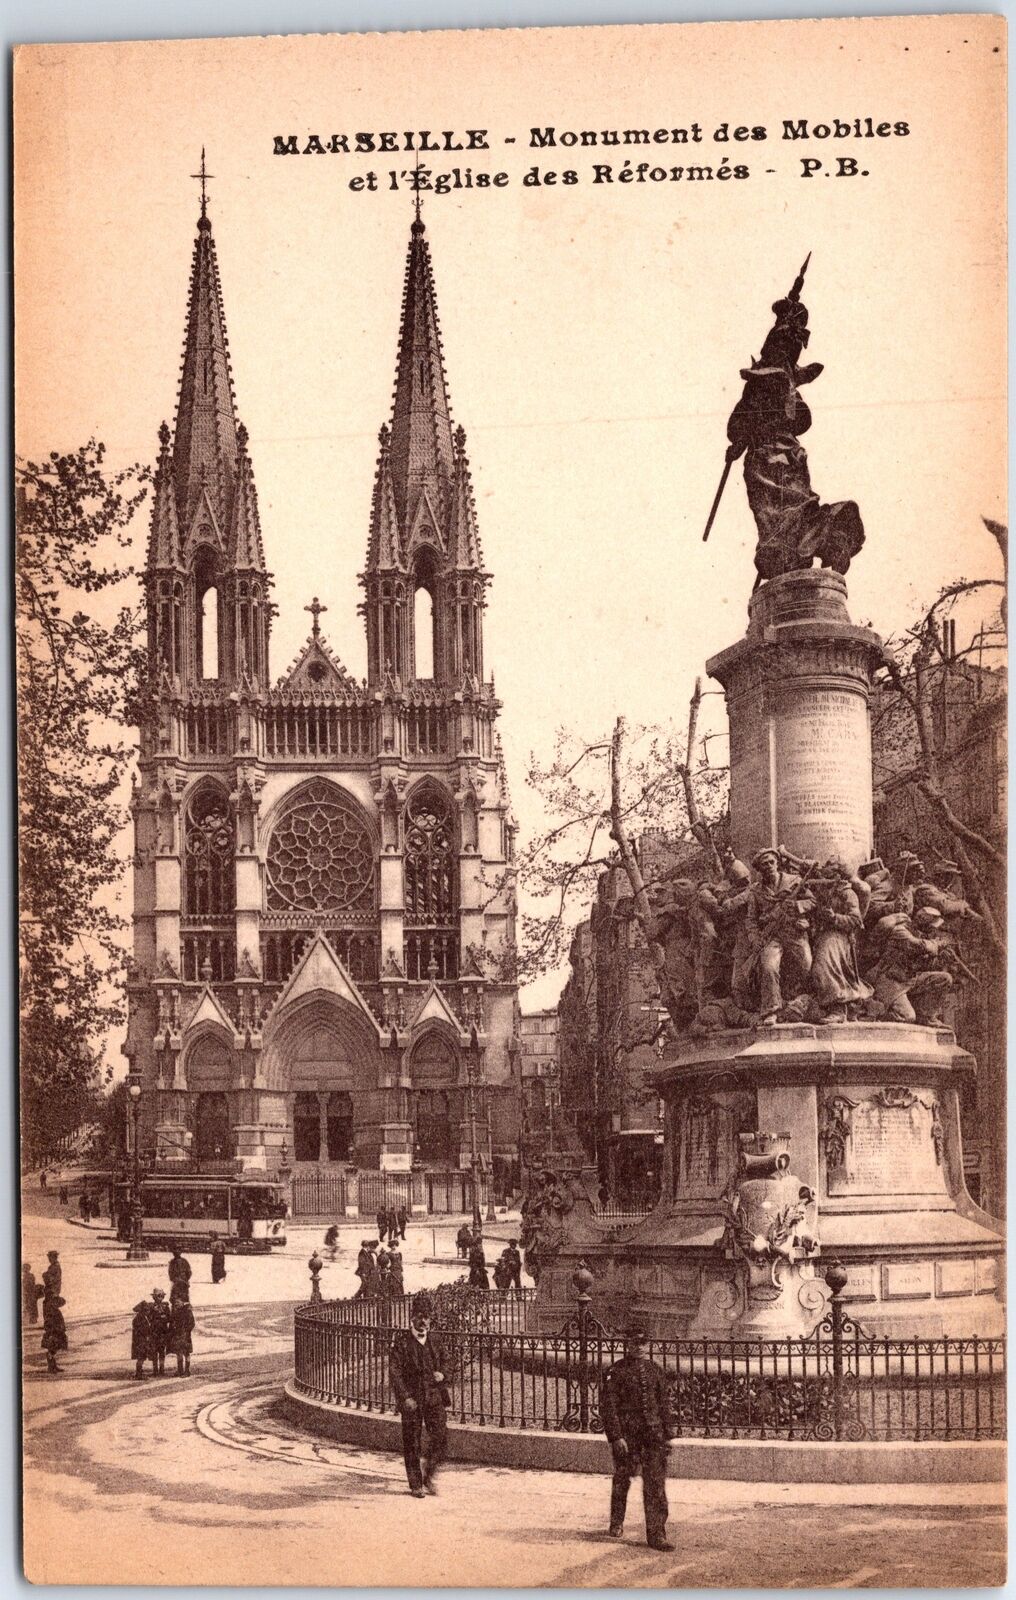 VINTAGE POSTCARD MONUMENT TO THE MOBILES AND THE REFORMED CHURCH AT MARSEILLES